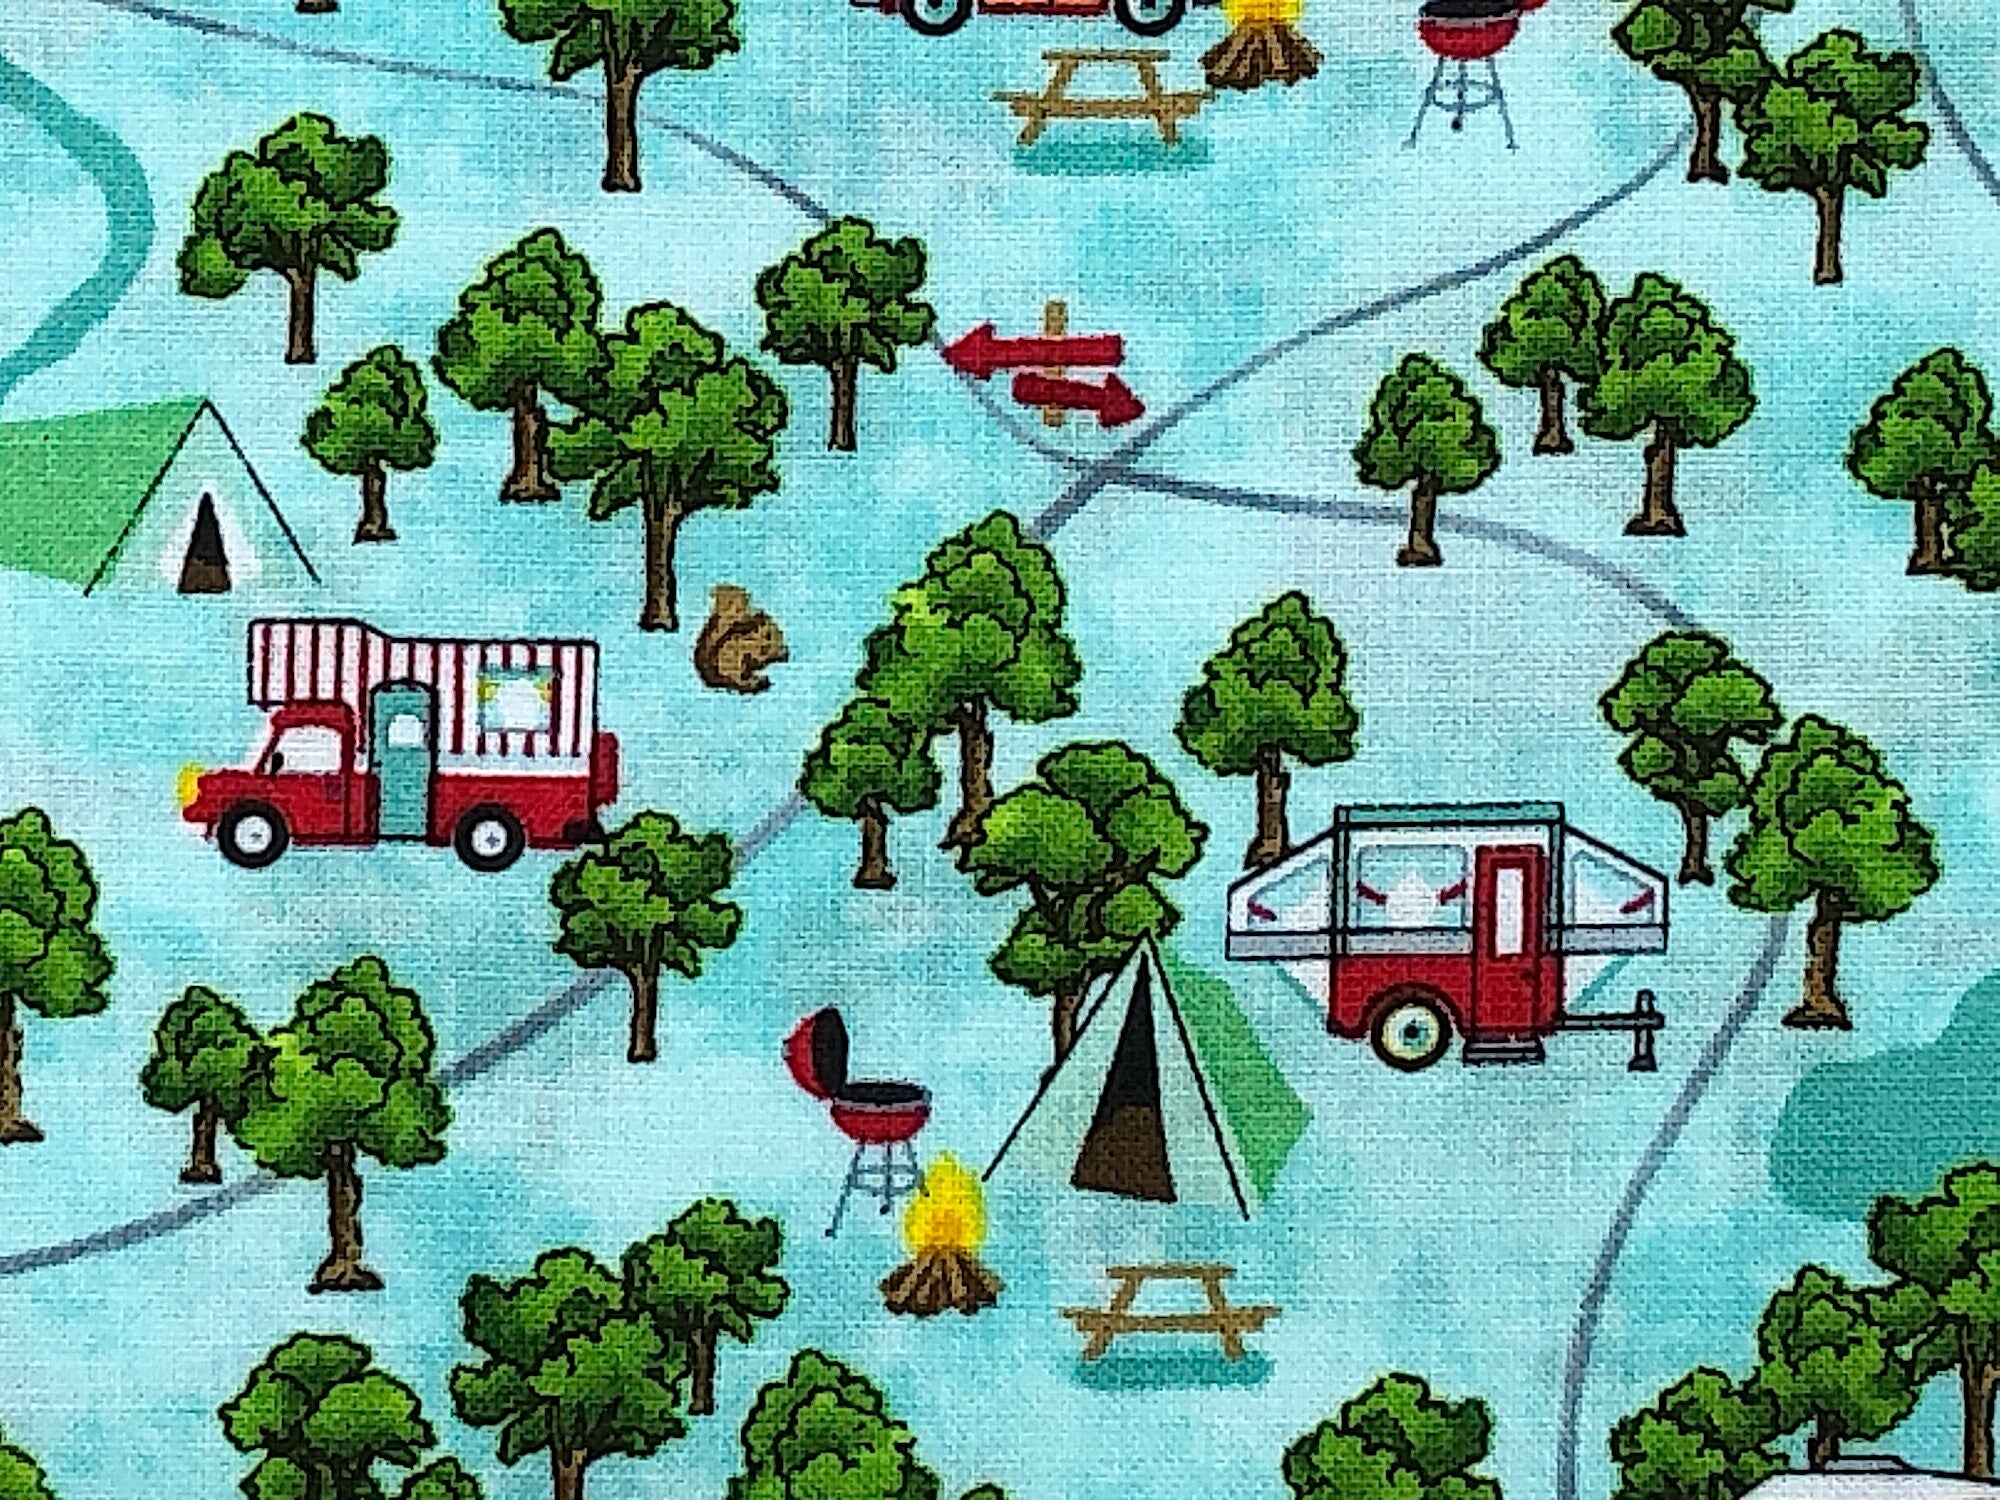 Close up of tent camper, trees, fire, picnic table and more.